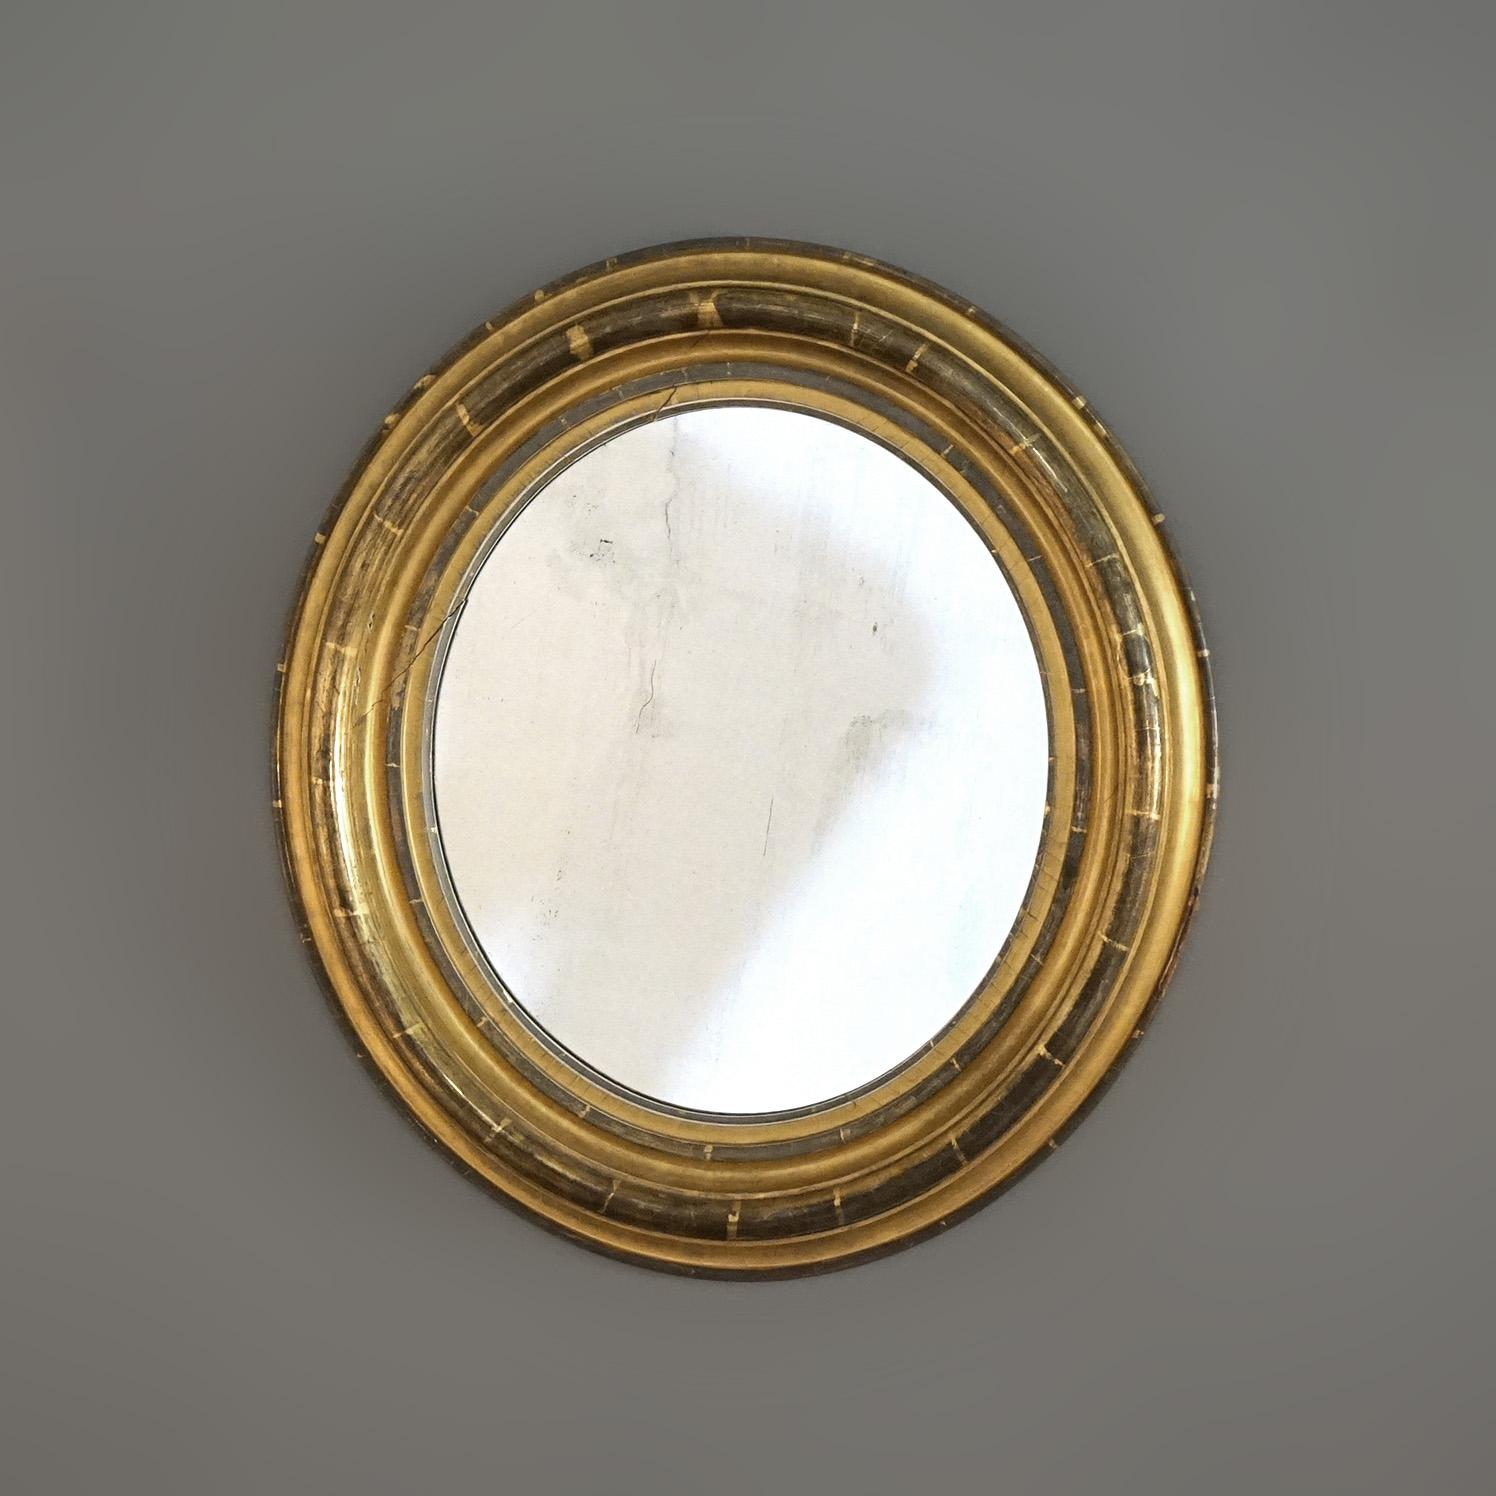 An antique American Empire oval wall mirror offers first finish giltwood frame, c1840

Measures- 23''H x 21''W x 3''D overall ; 14'' x 16'' sight 